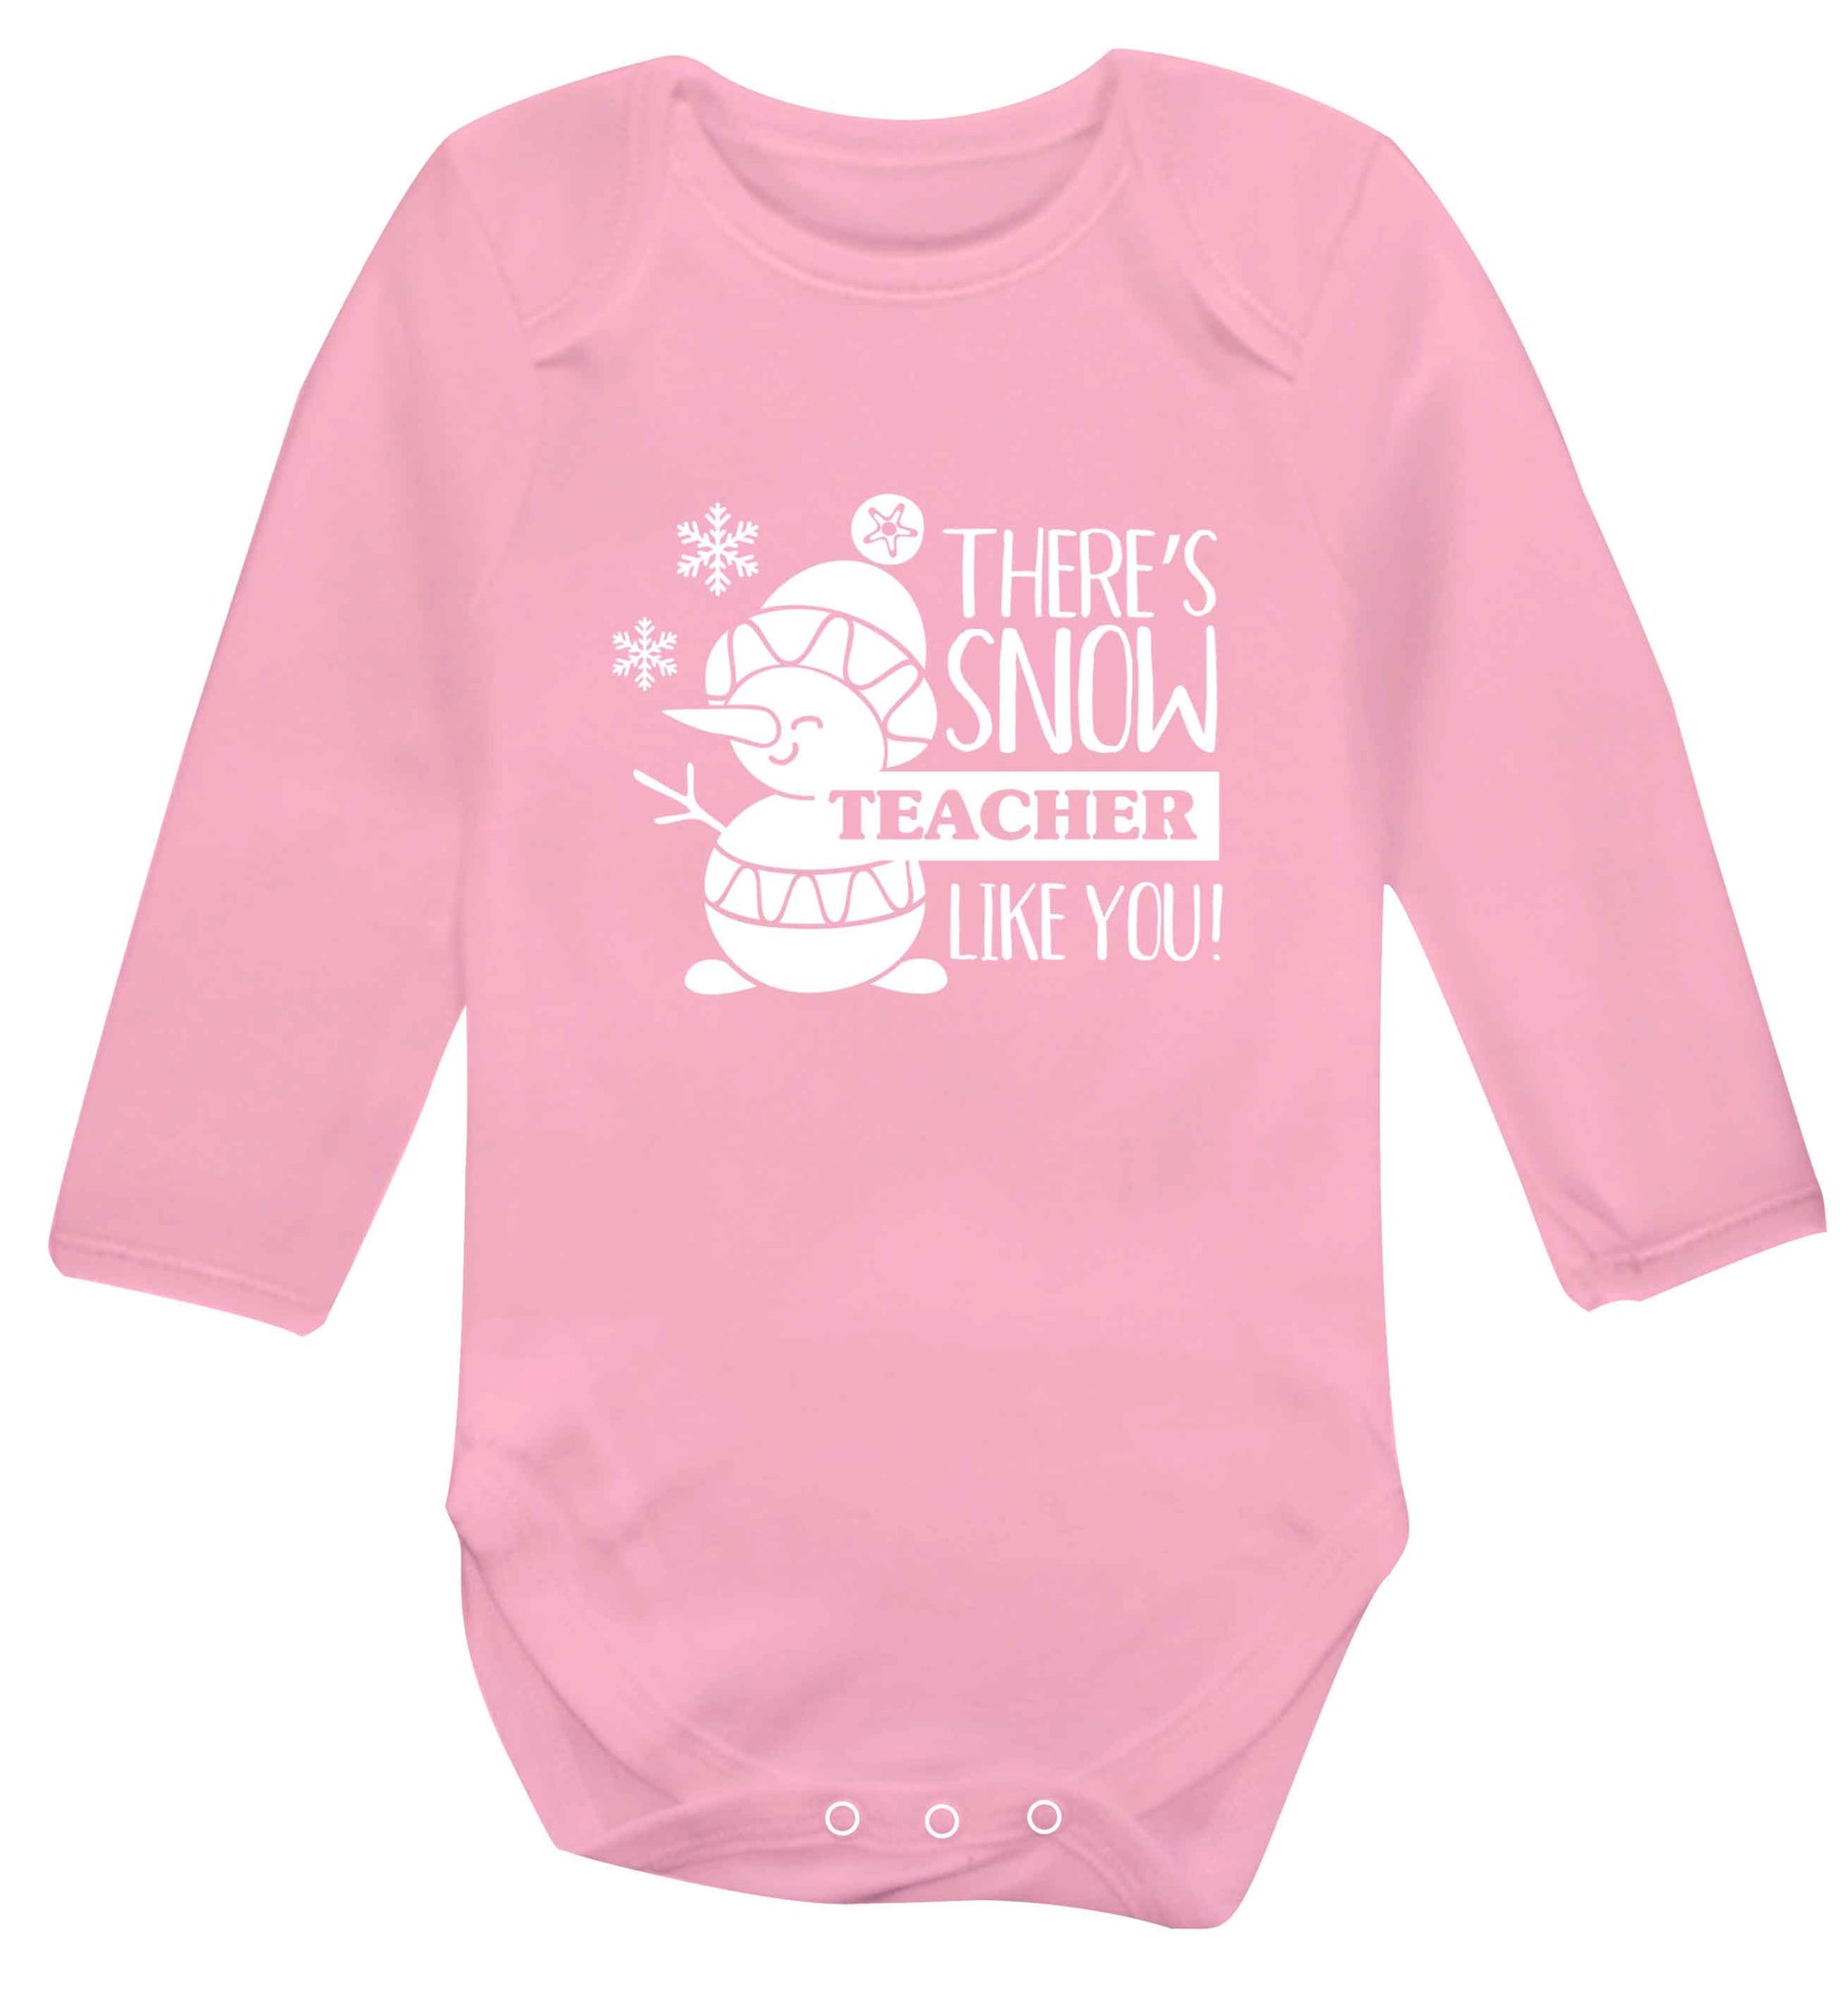 There's snow teacher like you baby vest long sleeved pale pink 6-12 months